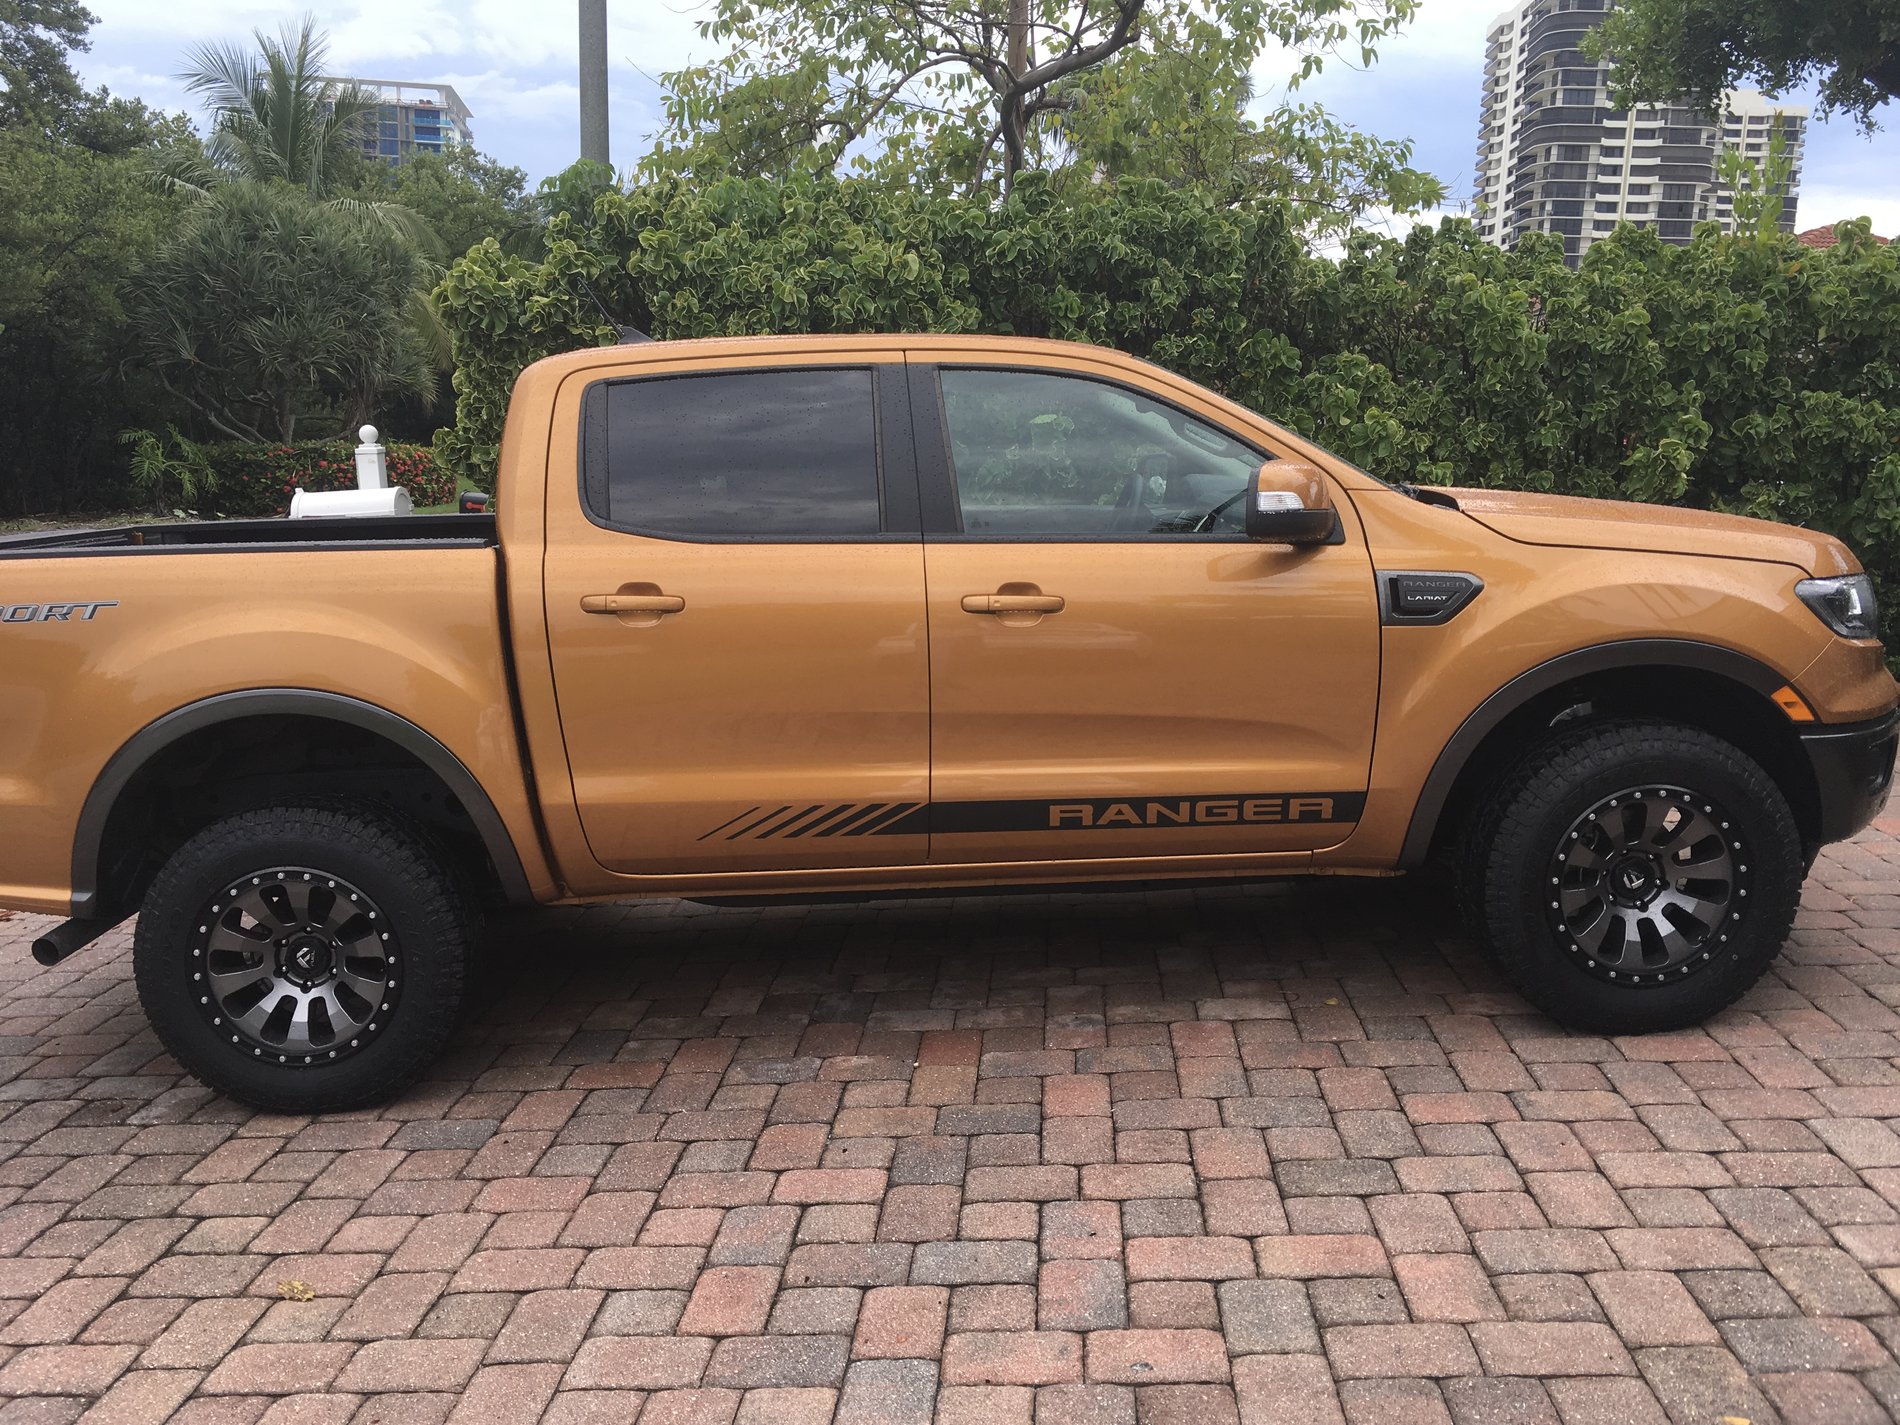 Ford Ranger Lets see your sport package trucks 98F9F2DD-7B06-4B6C-936A-155C4BEE31D3